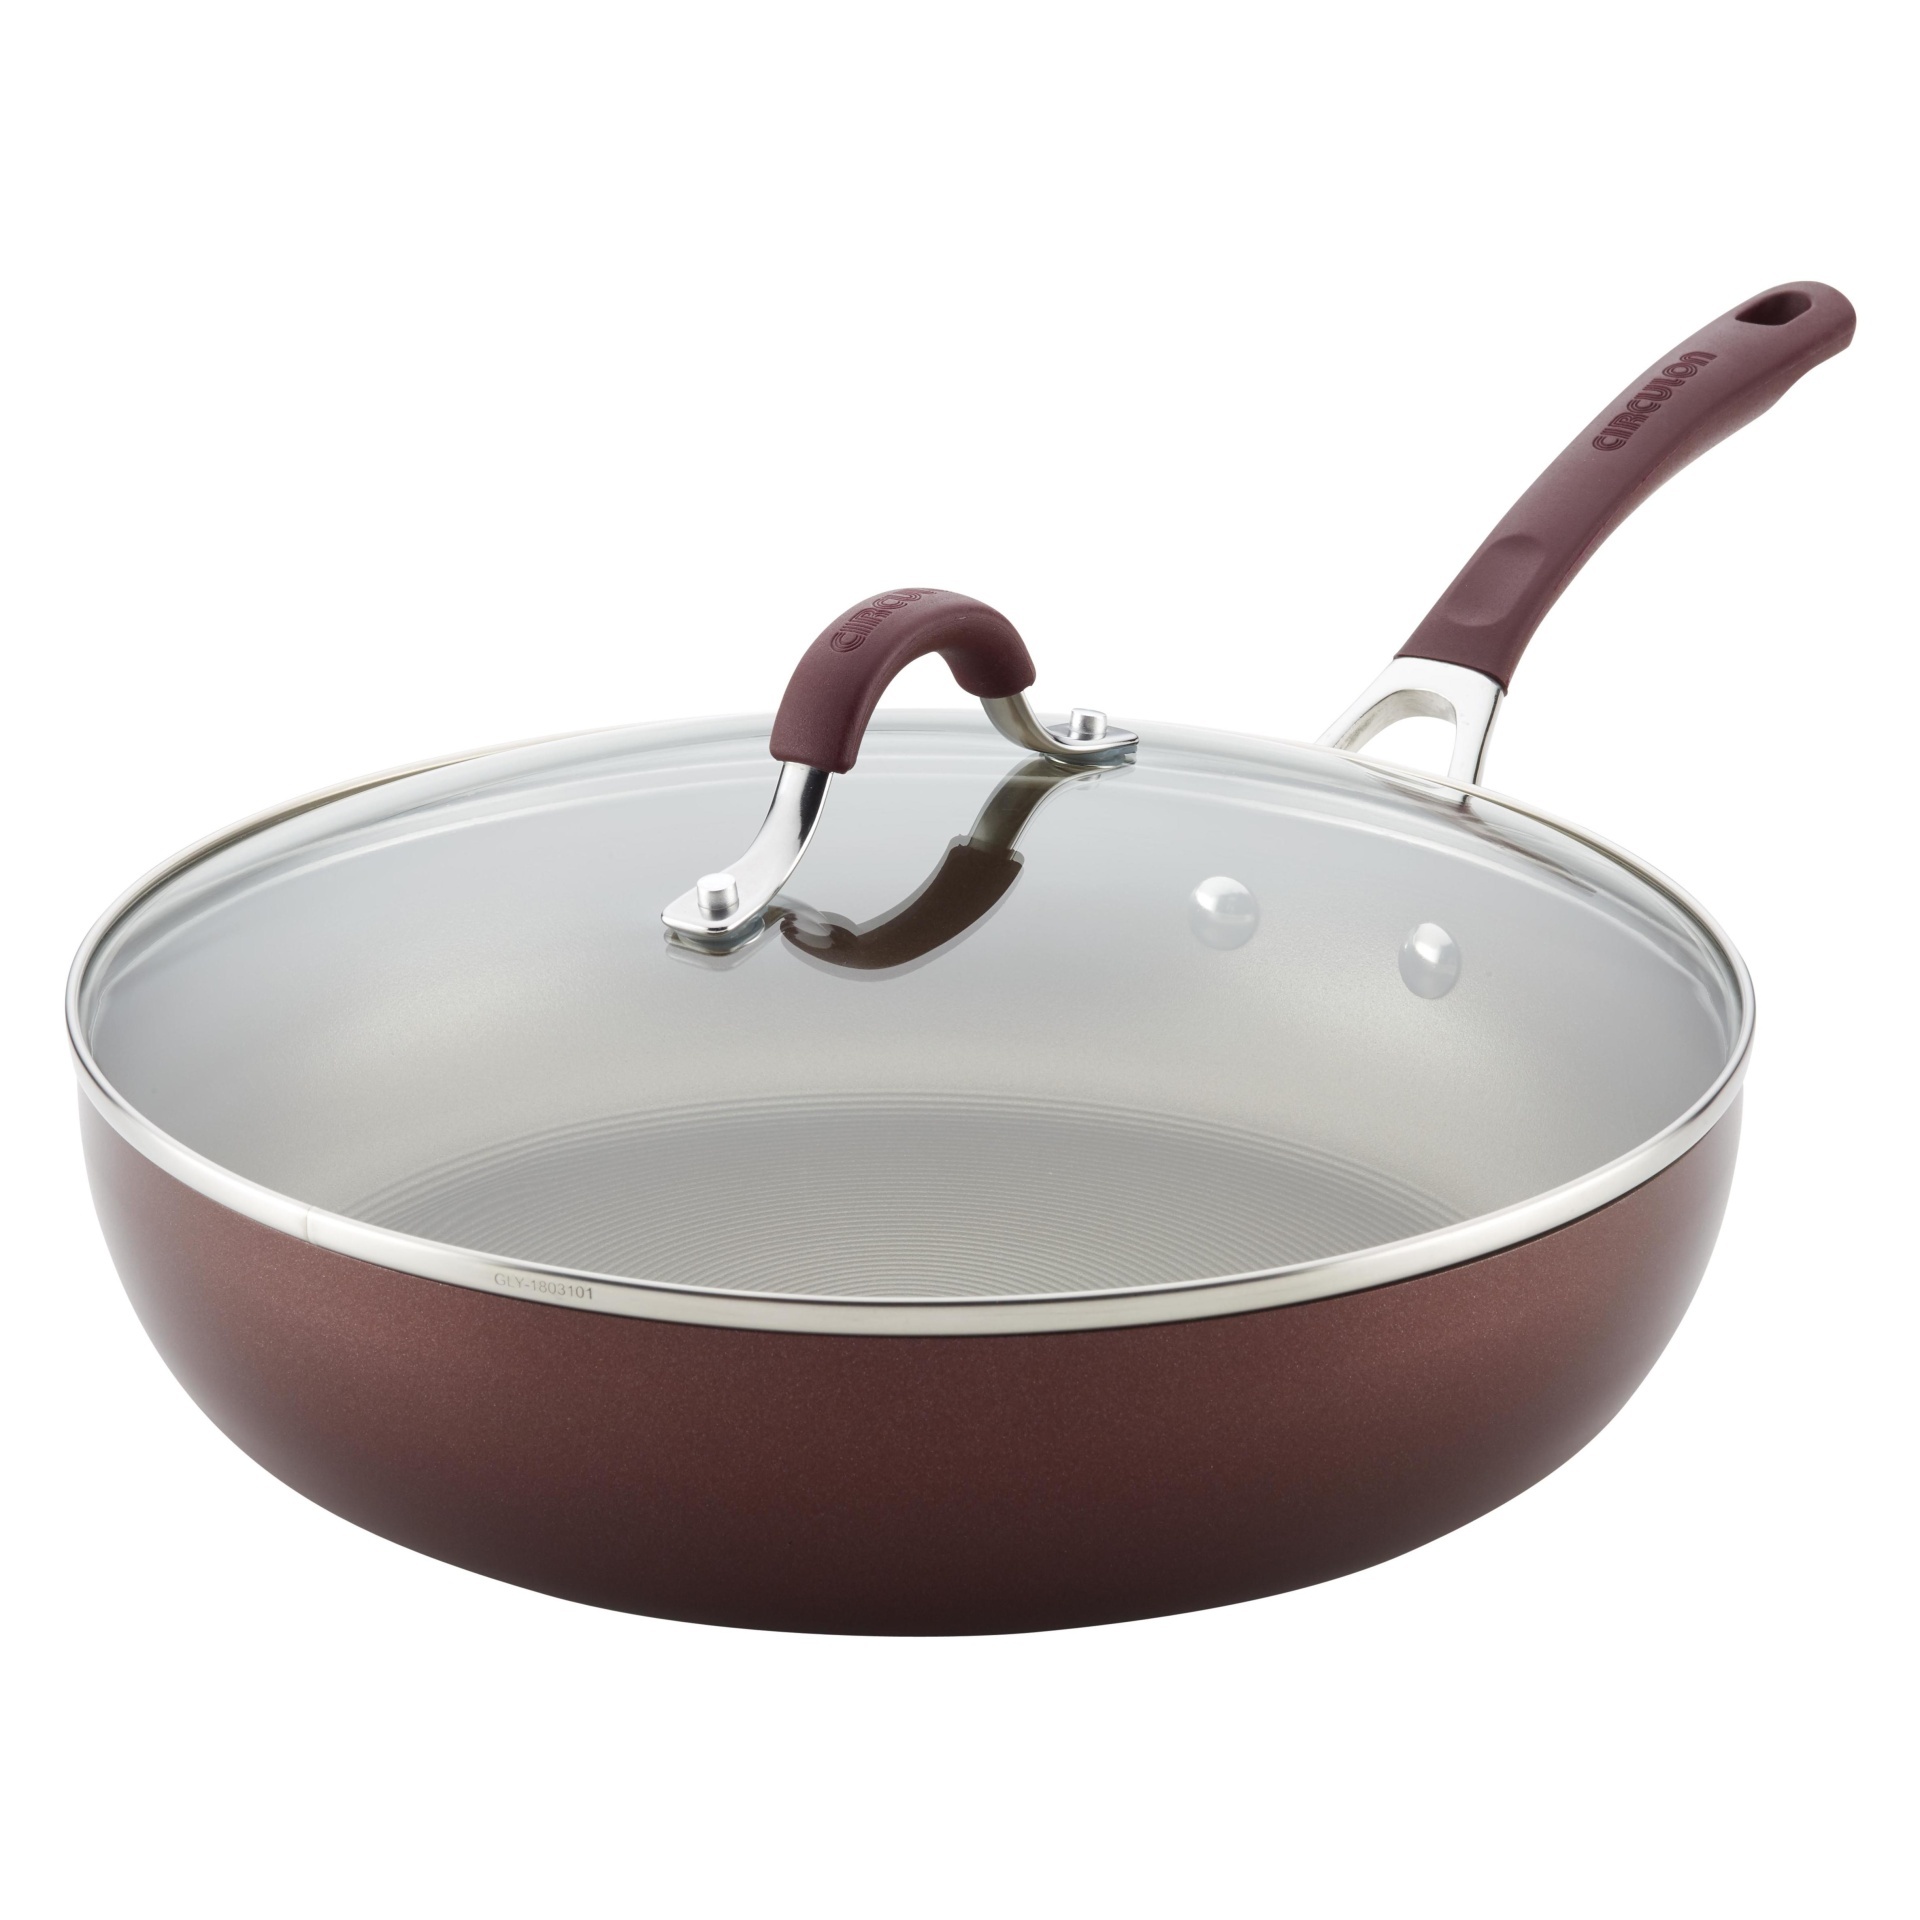 Circulon Innovatum Hard-Anodized Nonstick Deep Skillet with Lid ...